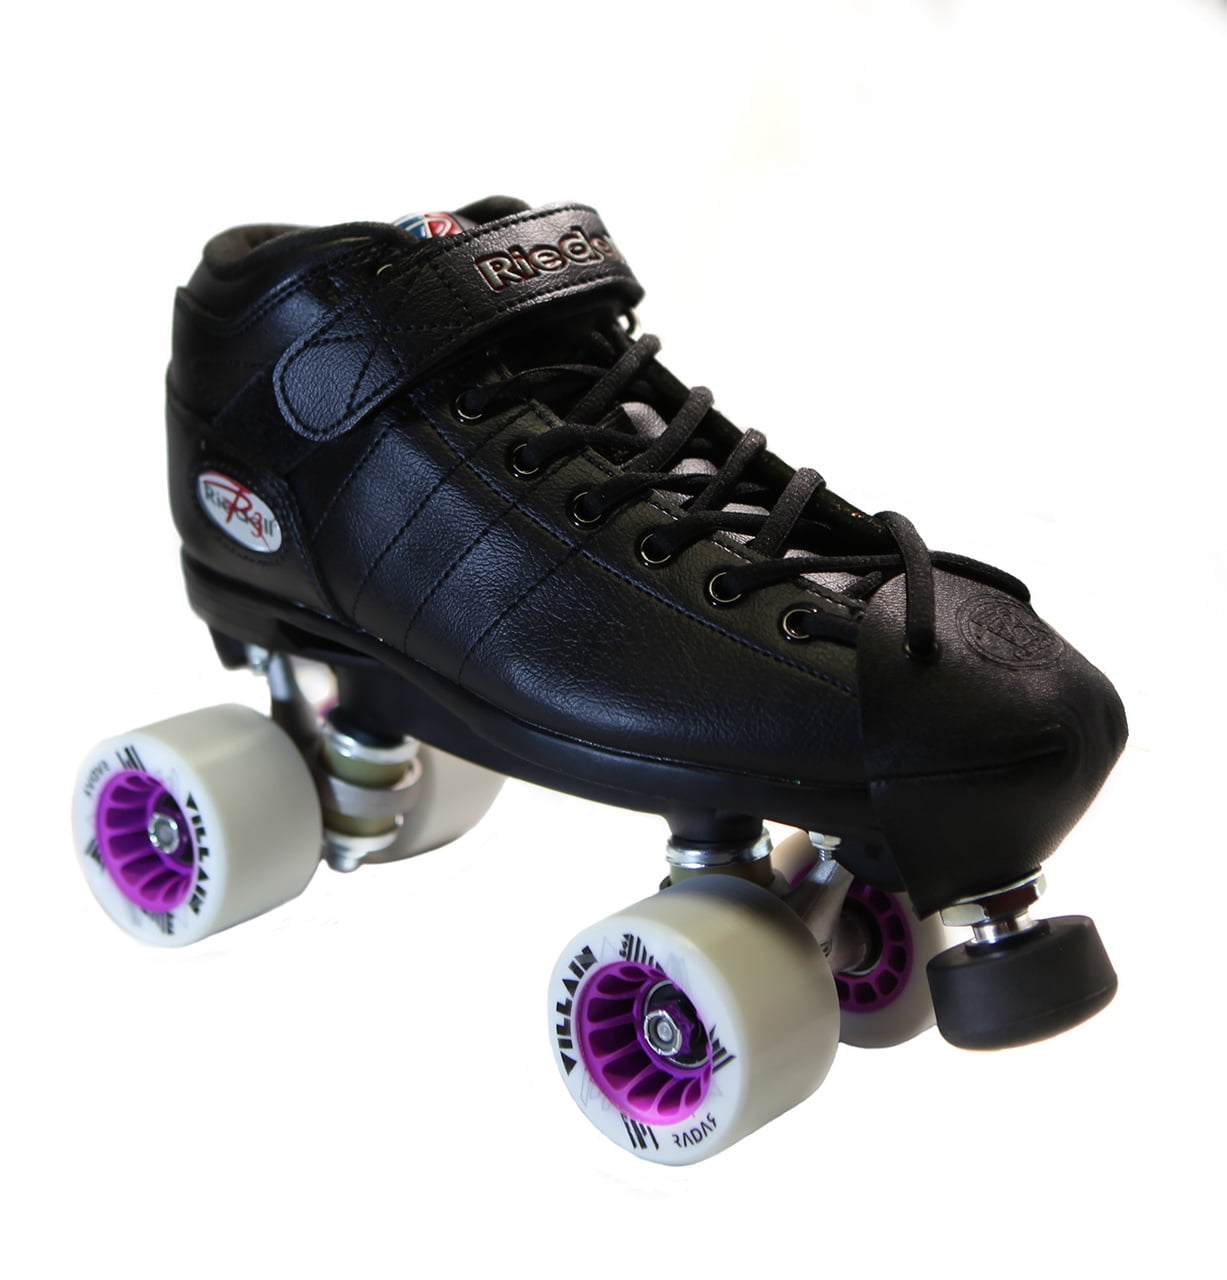 Details about   Riedell R3 Outdoor Quad Roller Skates 